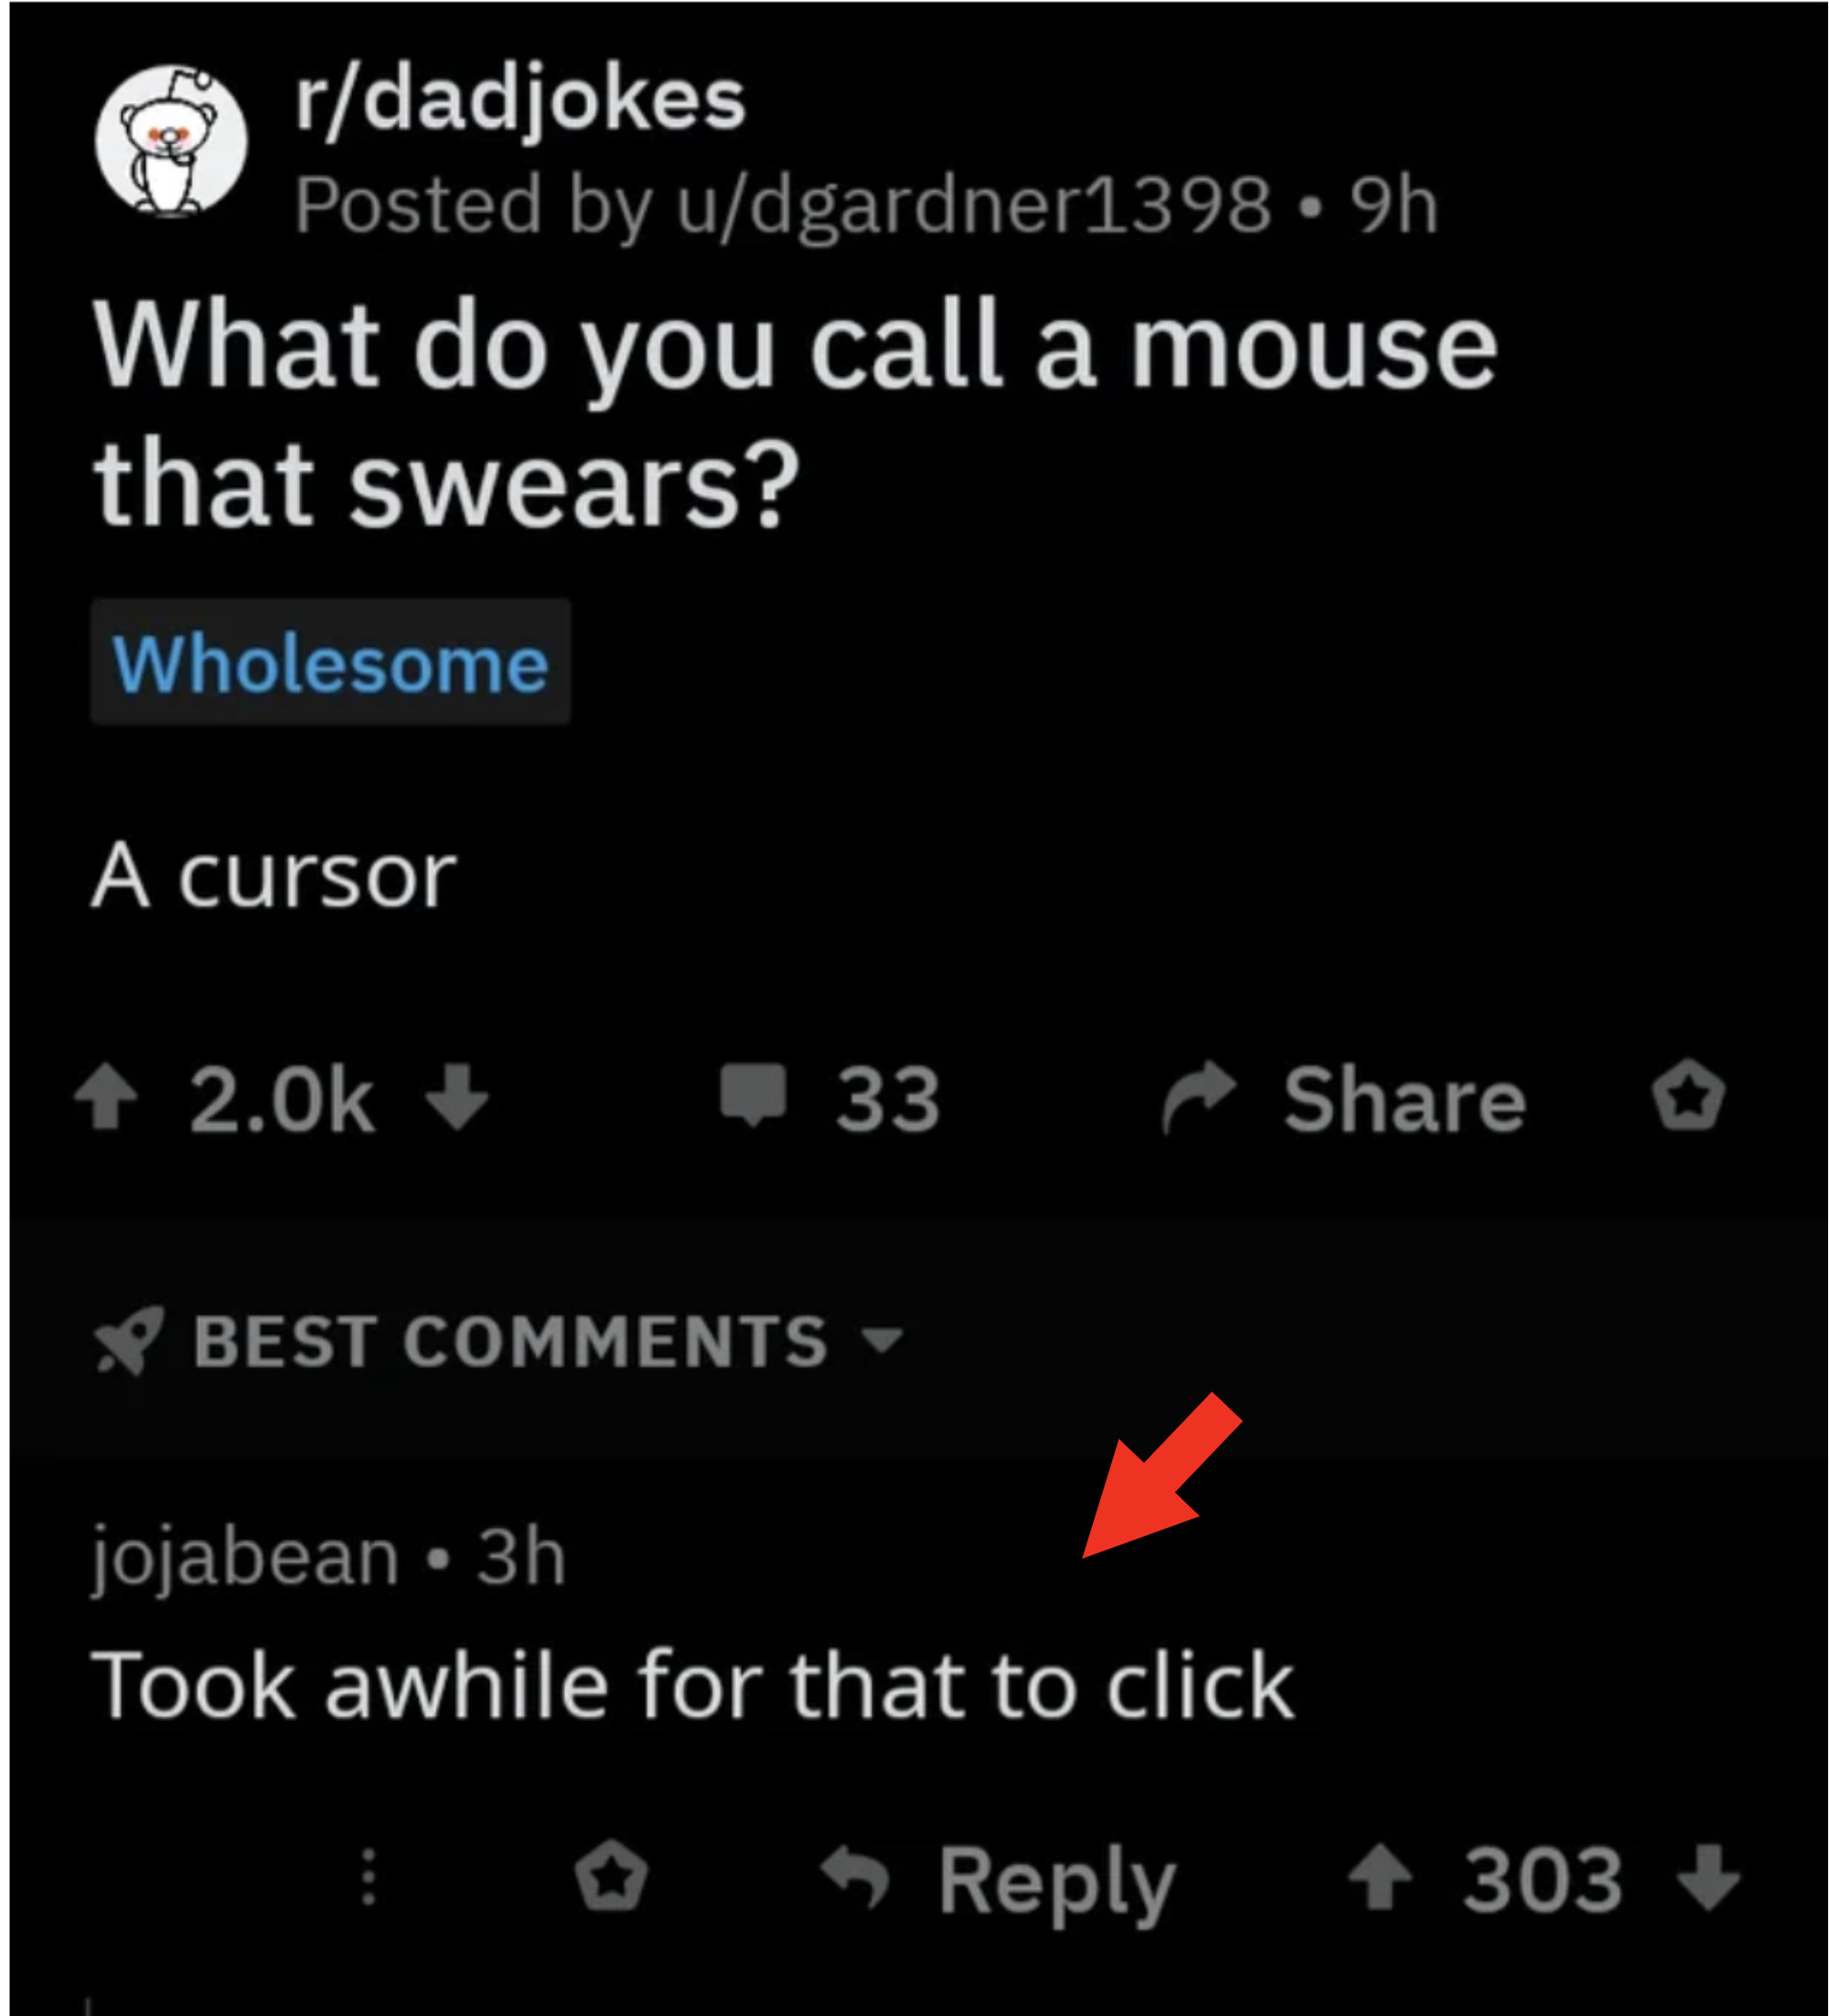 The silly story says "What attain you call a mouse that swears? A cursor" but spelled relish the cursor of a laptop mouse, and the commenter responds "took some time for that to click"